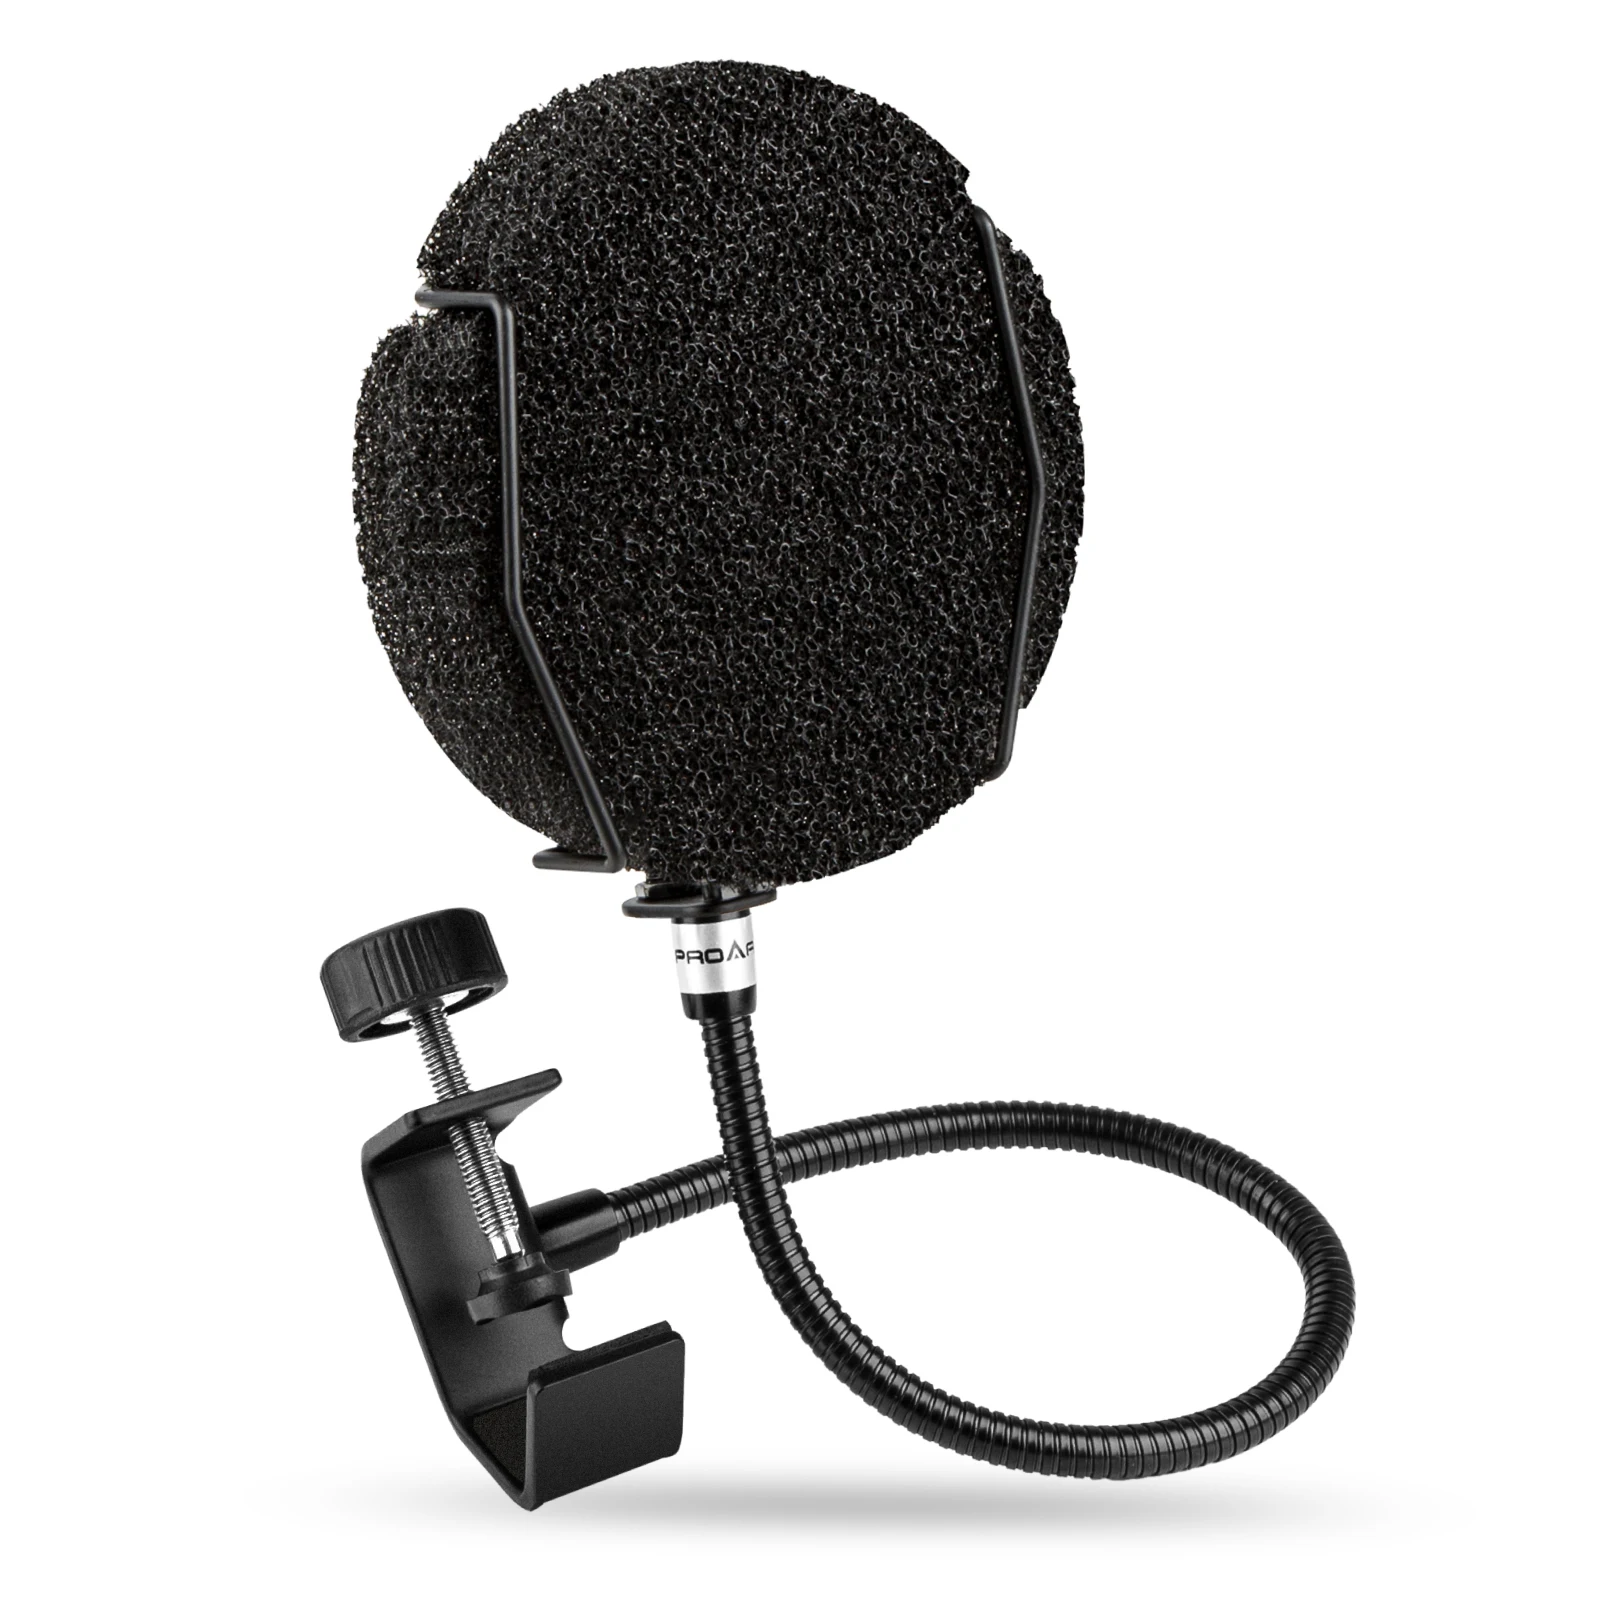 High Quality Microphone Pop Filter Metal Pop Filter Shield Windscreen Pop Filter for USB Microphone Podcast Microphone